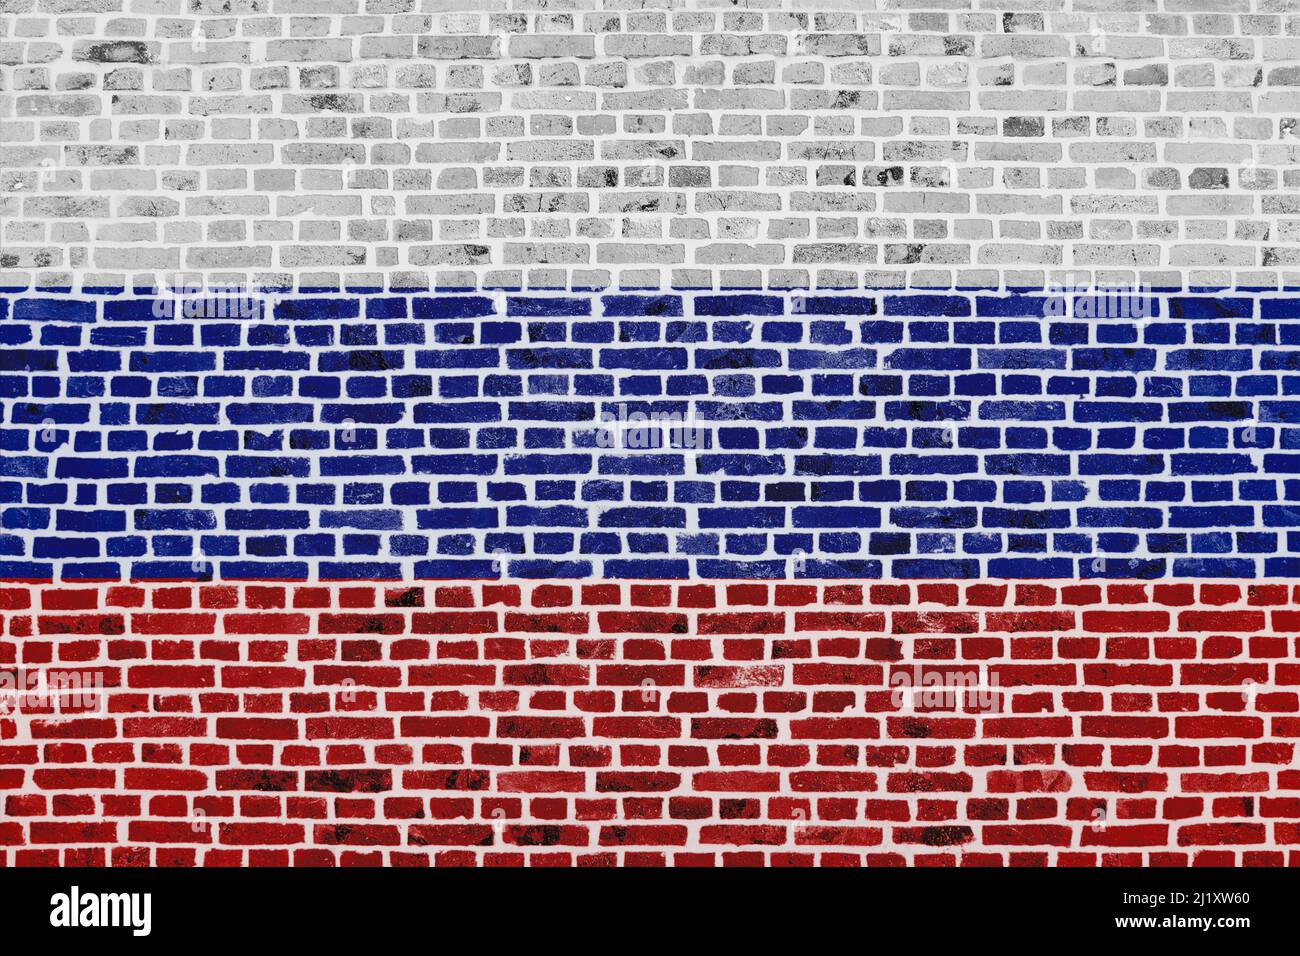 Close-up on a brick wall with the flag of Russia painted on it. Stock Photo